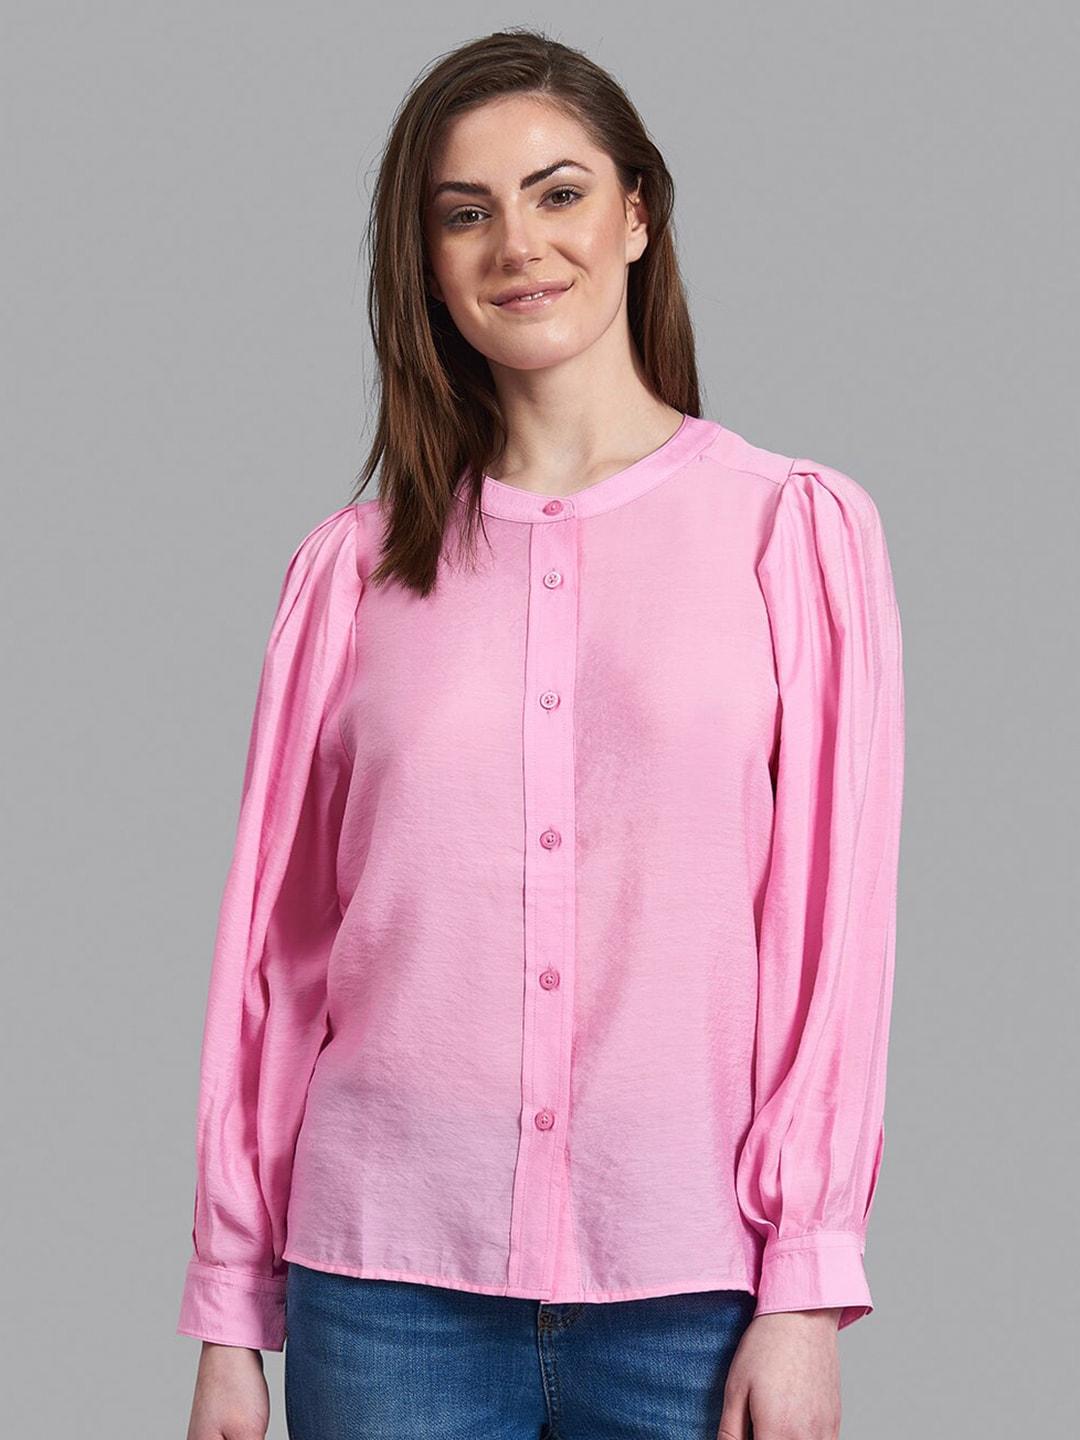 Beverly Hills Polo Club Women Pink Casual Shirt